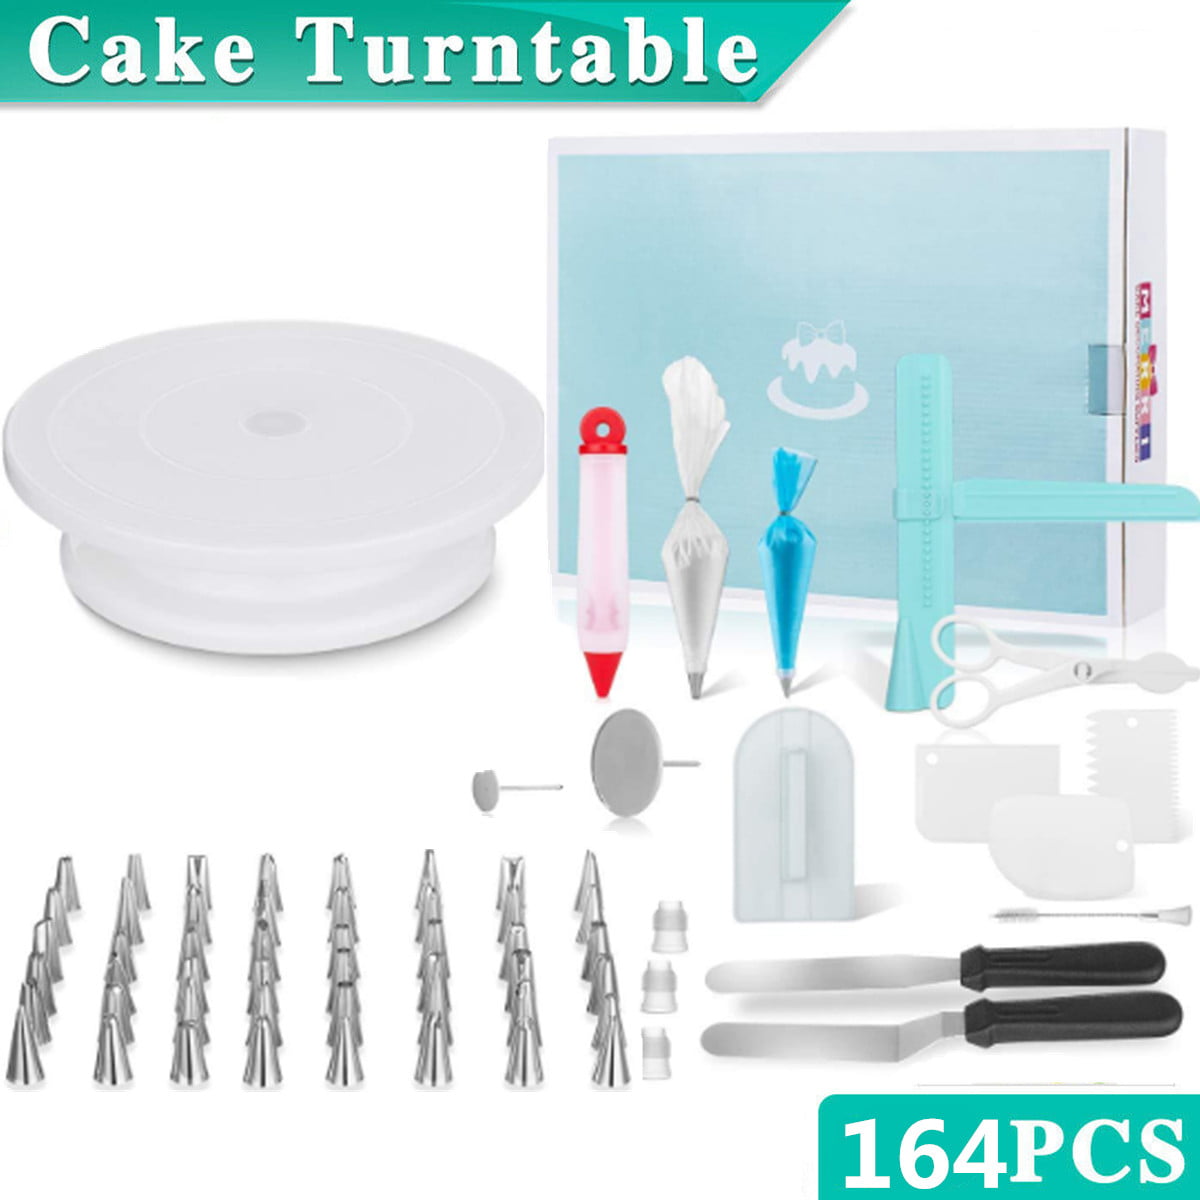 Cake Turntable Rotating Cake Stand Kit Professional Baking Baking and Piping Set Decorating Supplies Tool for Baking Pastry 52pcs